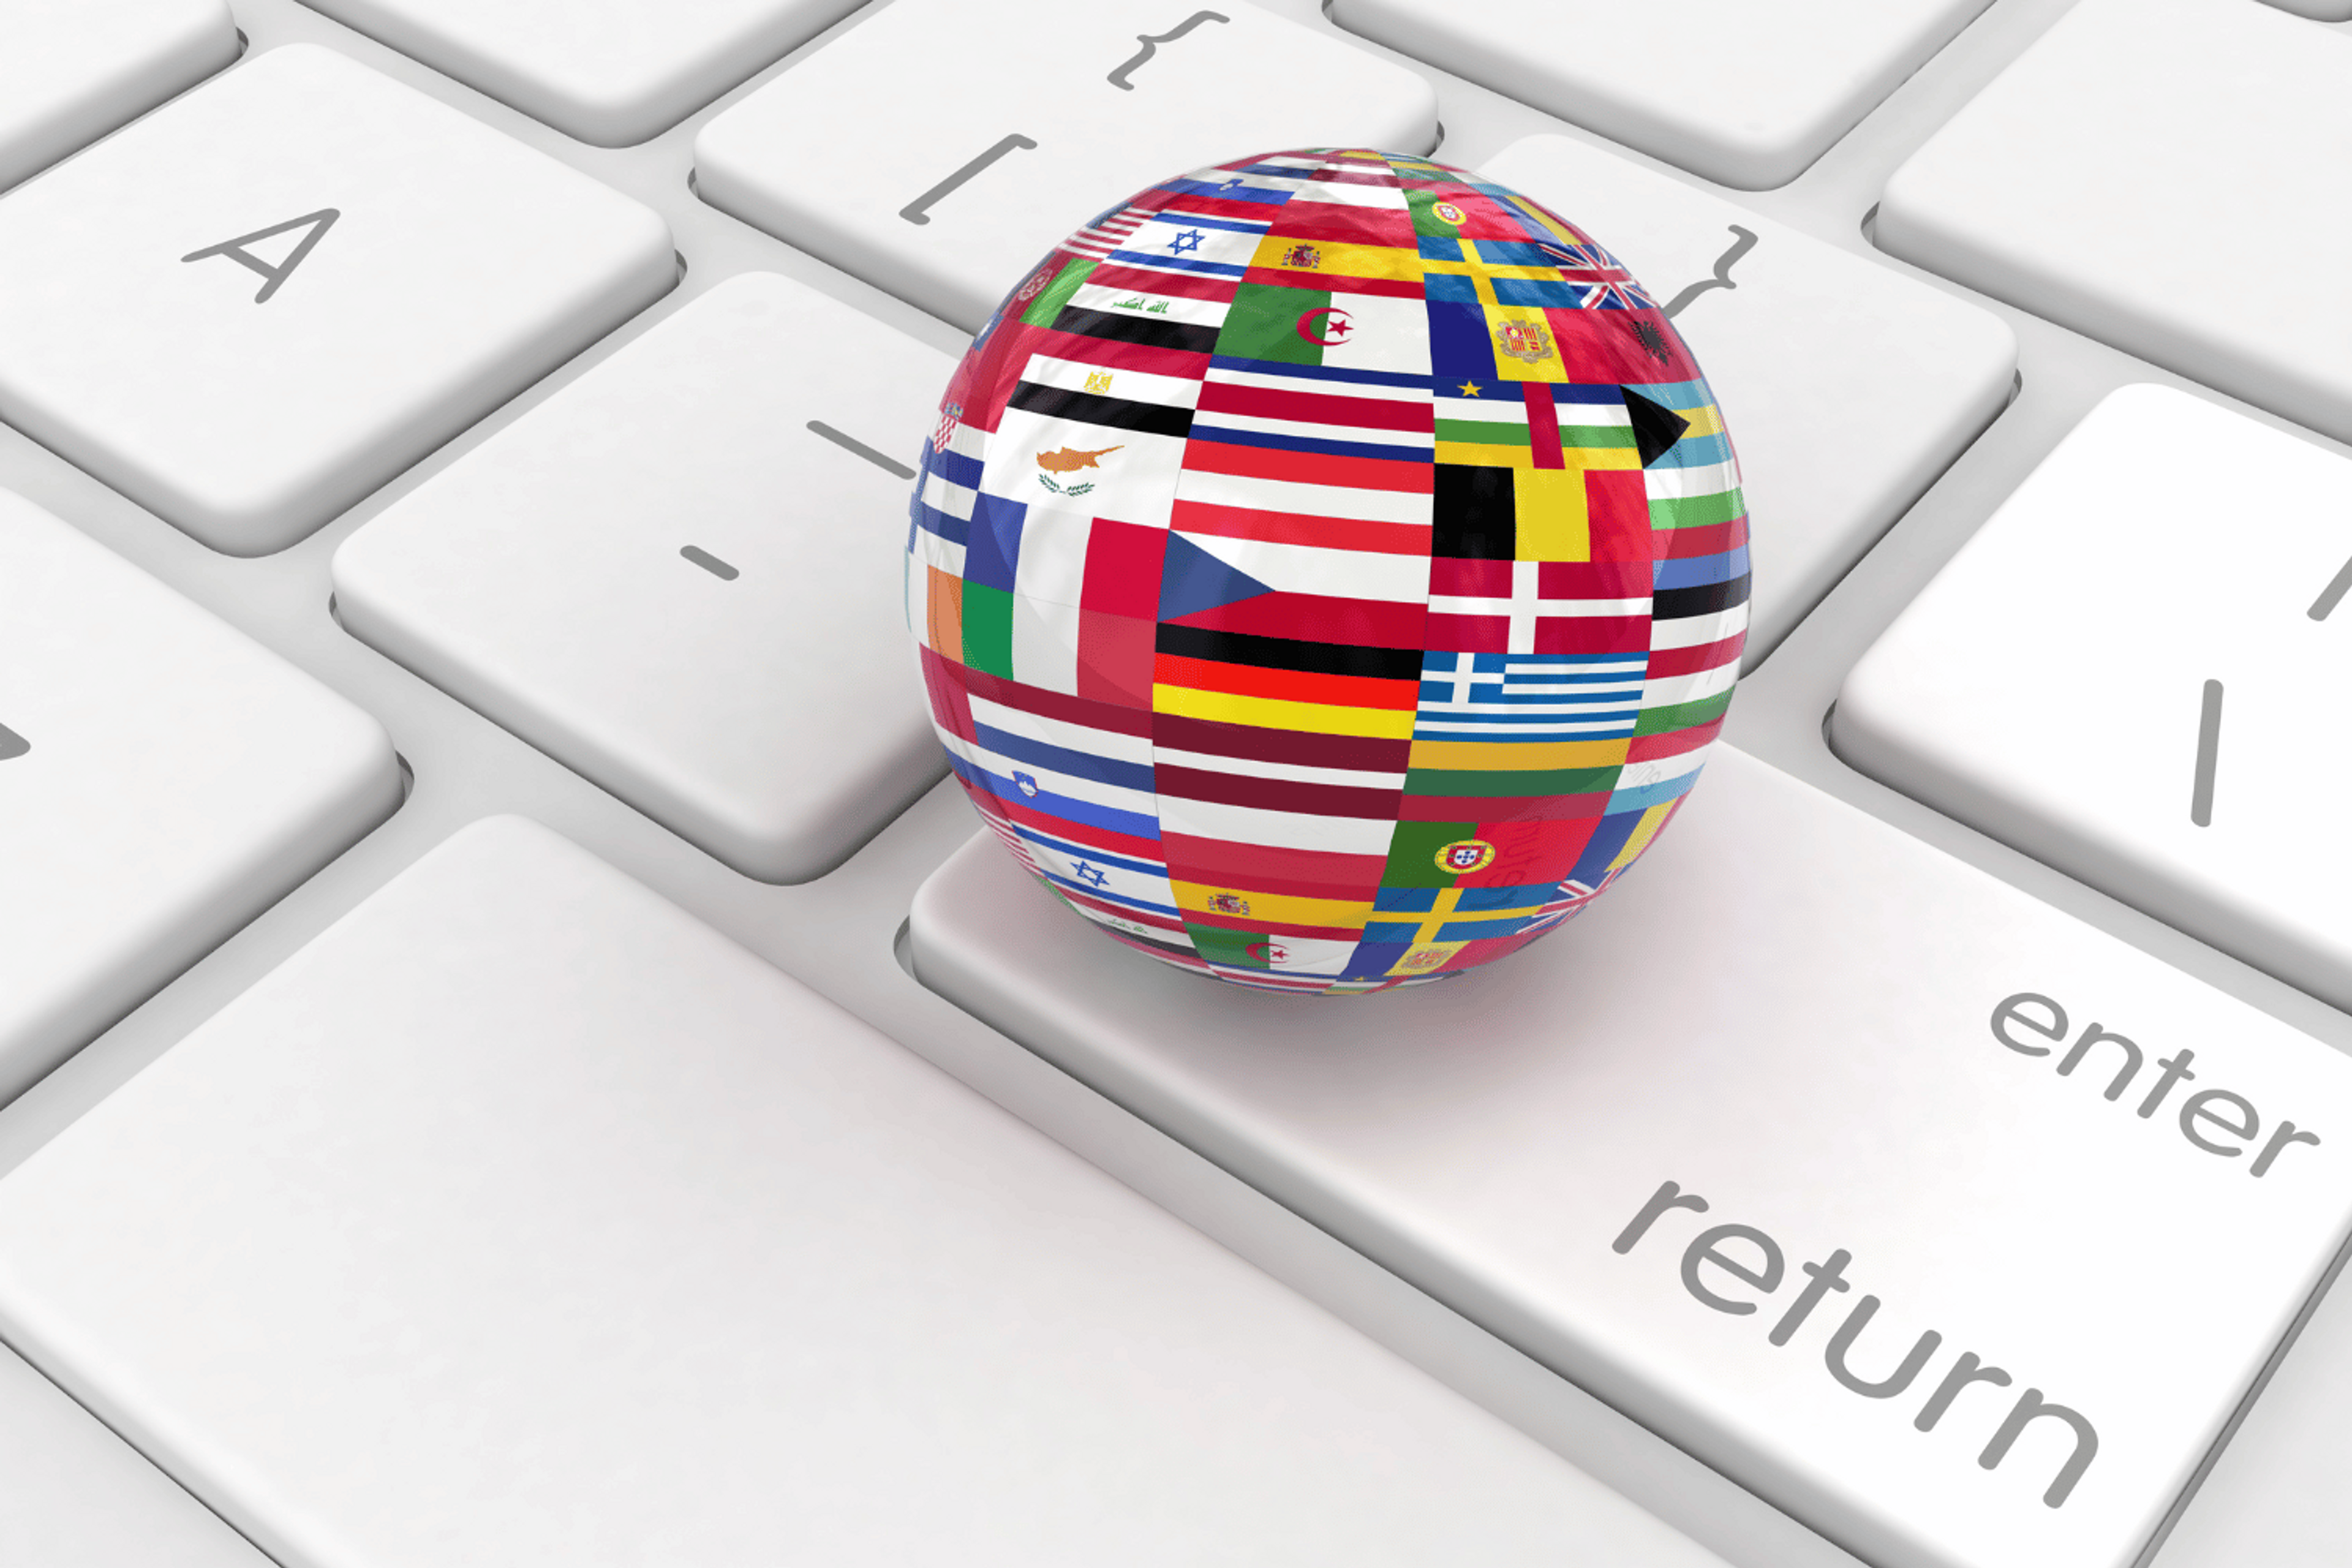 Image of an international globe full of flags placed on a keyboard.